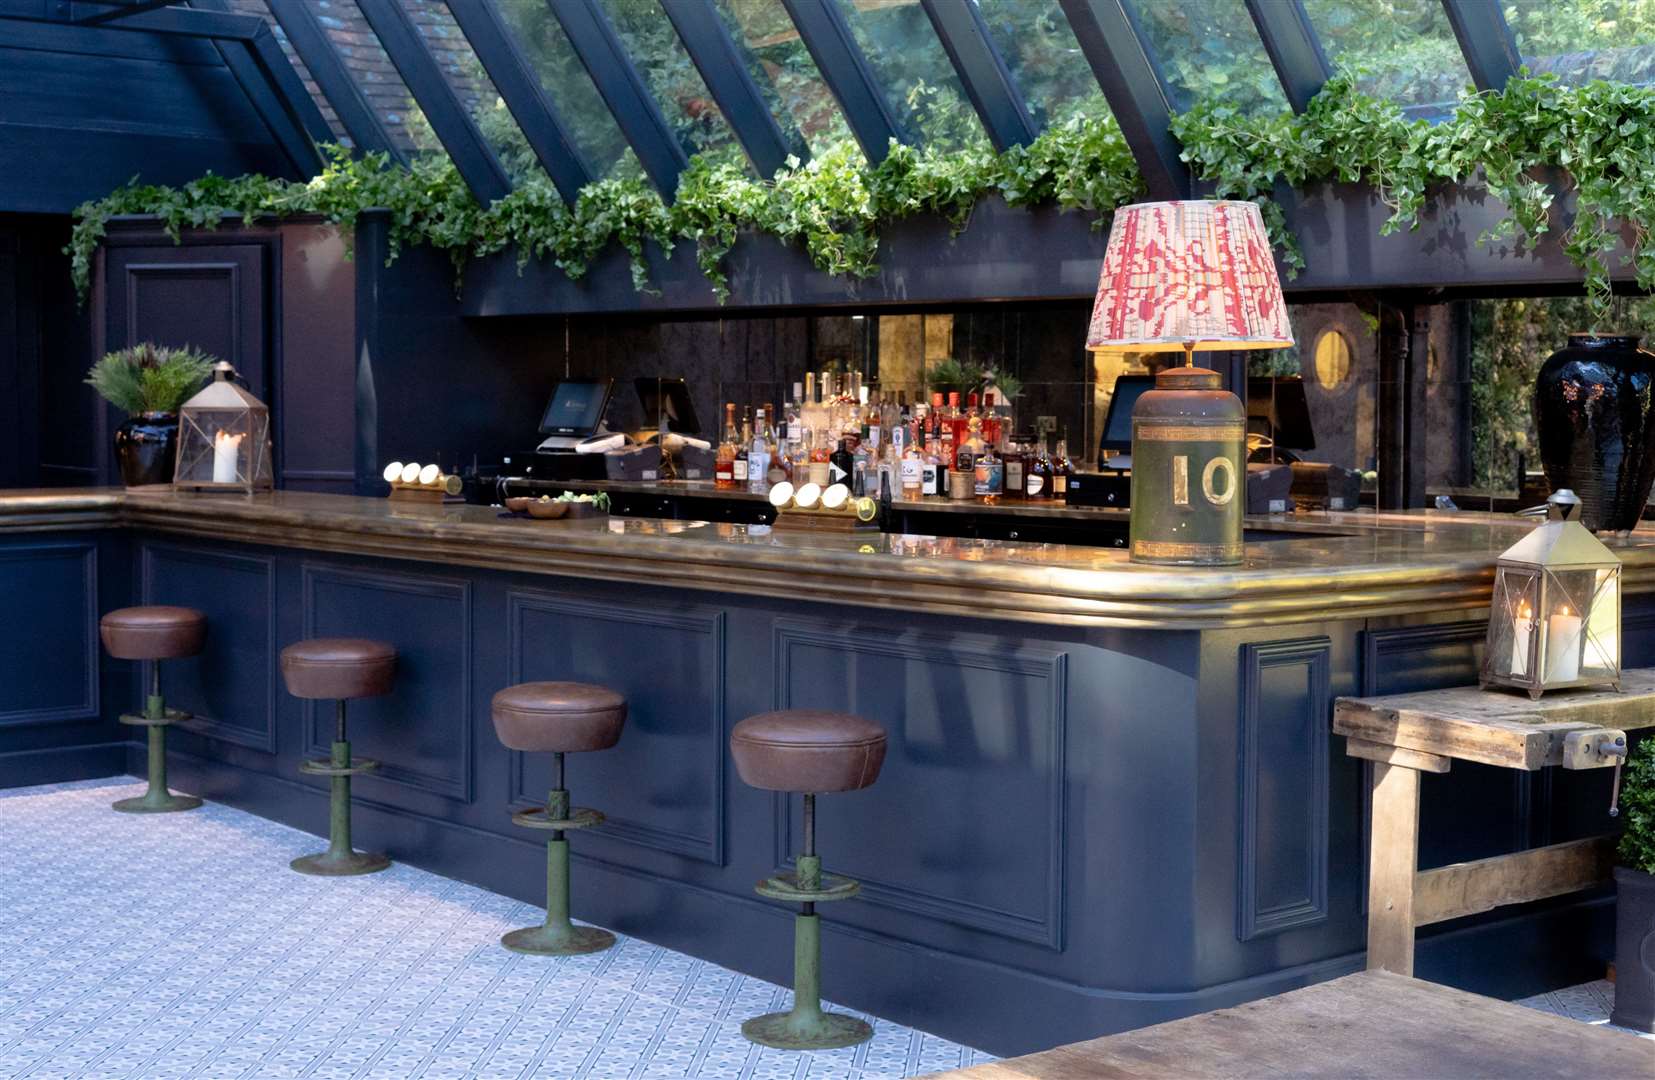 The bar at The Garden Room venue. Picture: Jeff Oliver